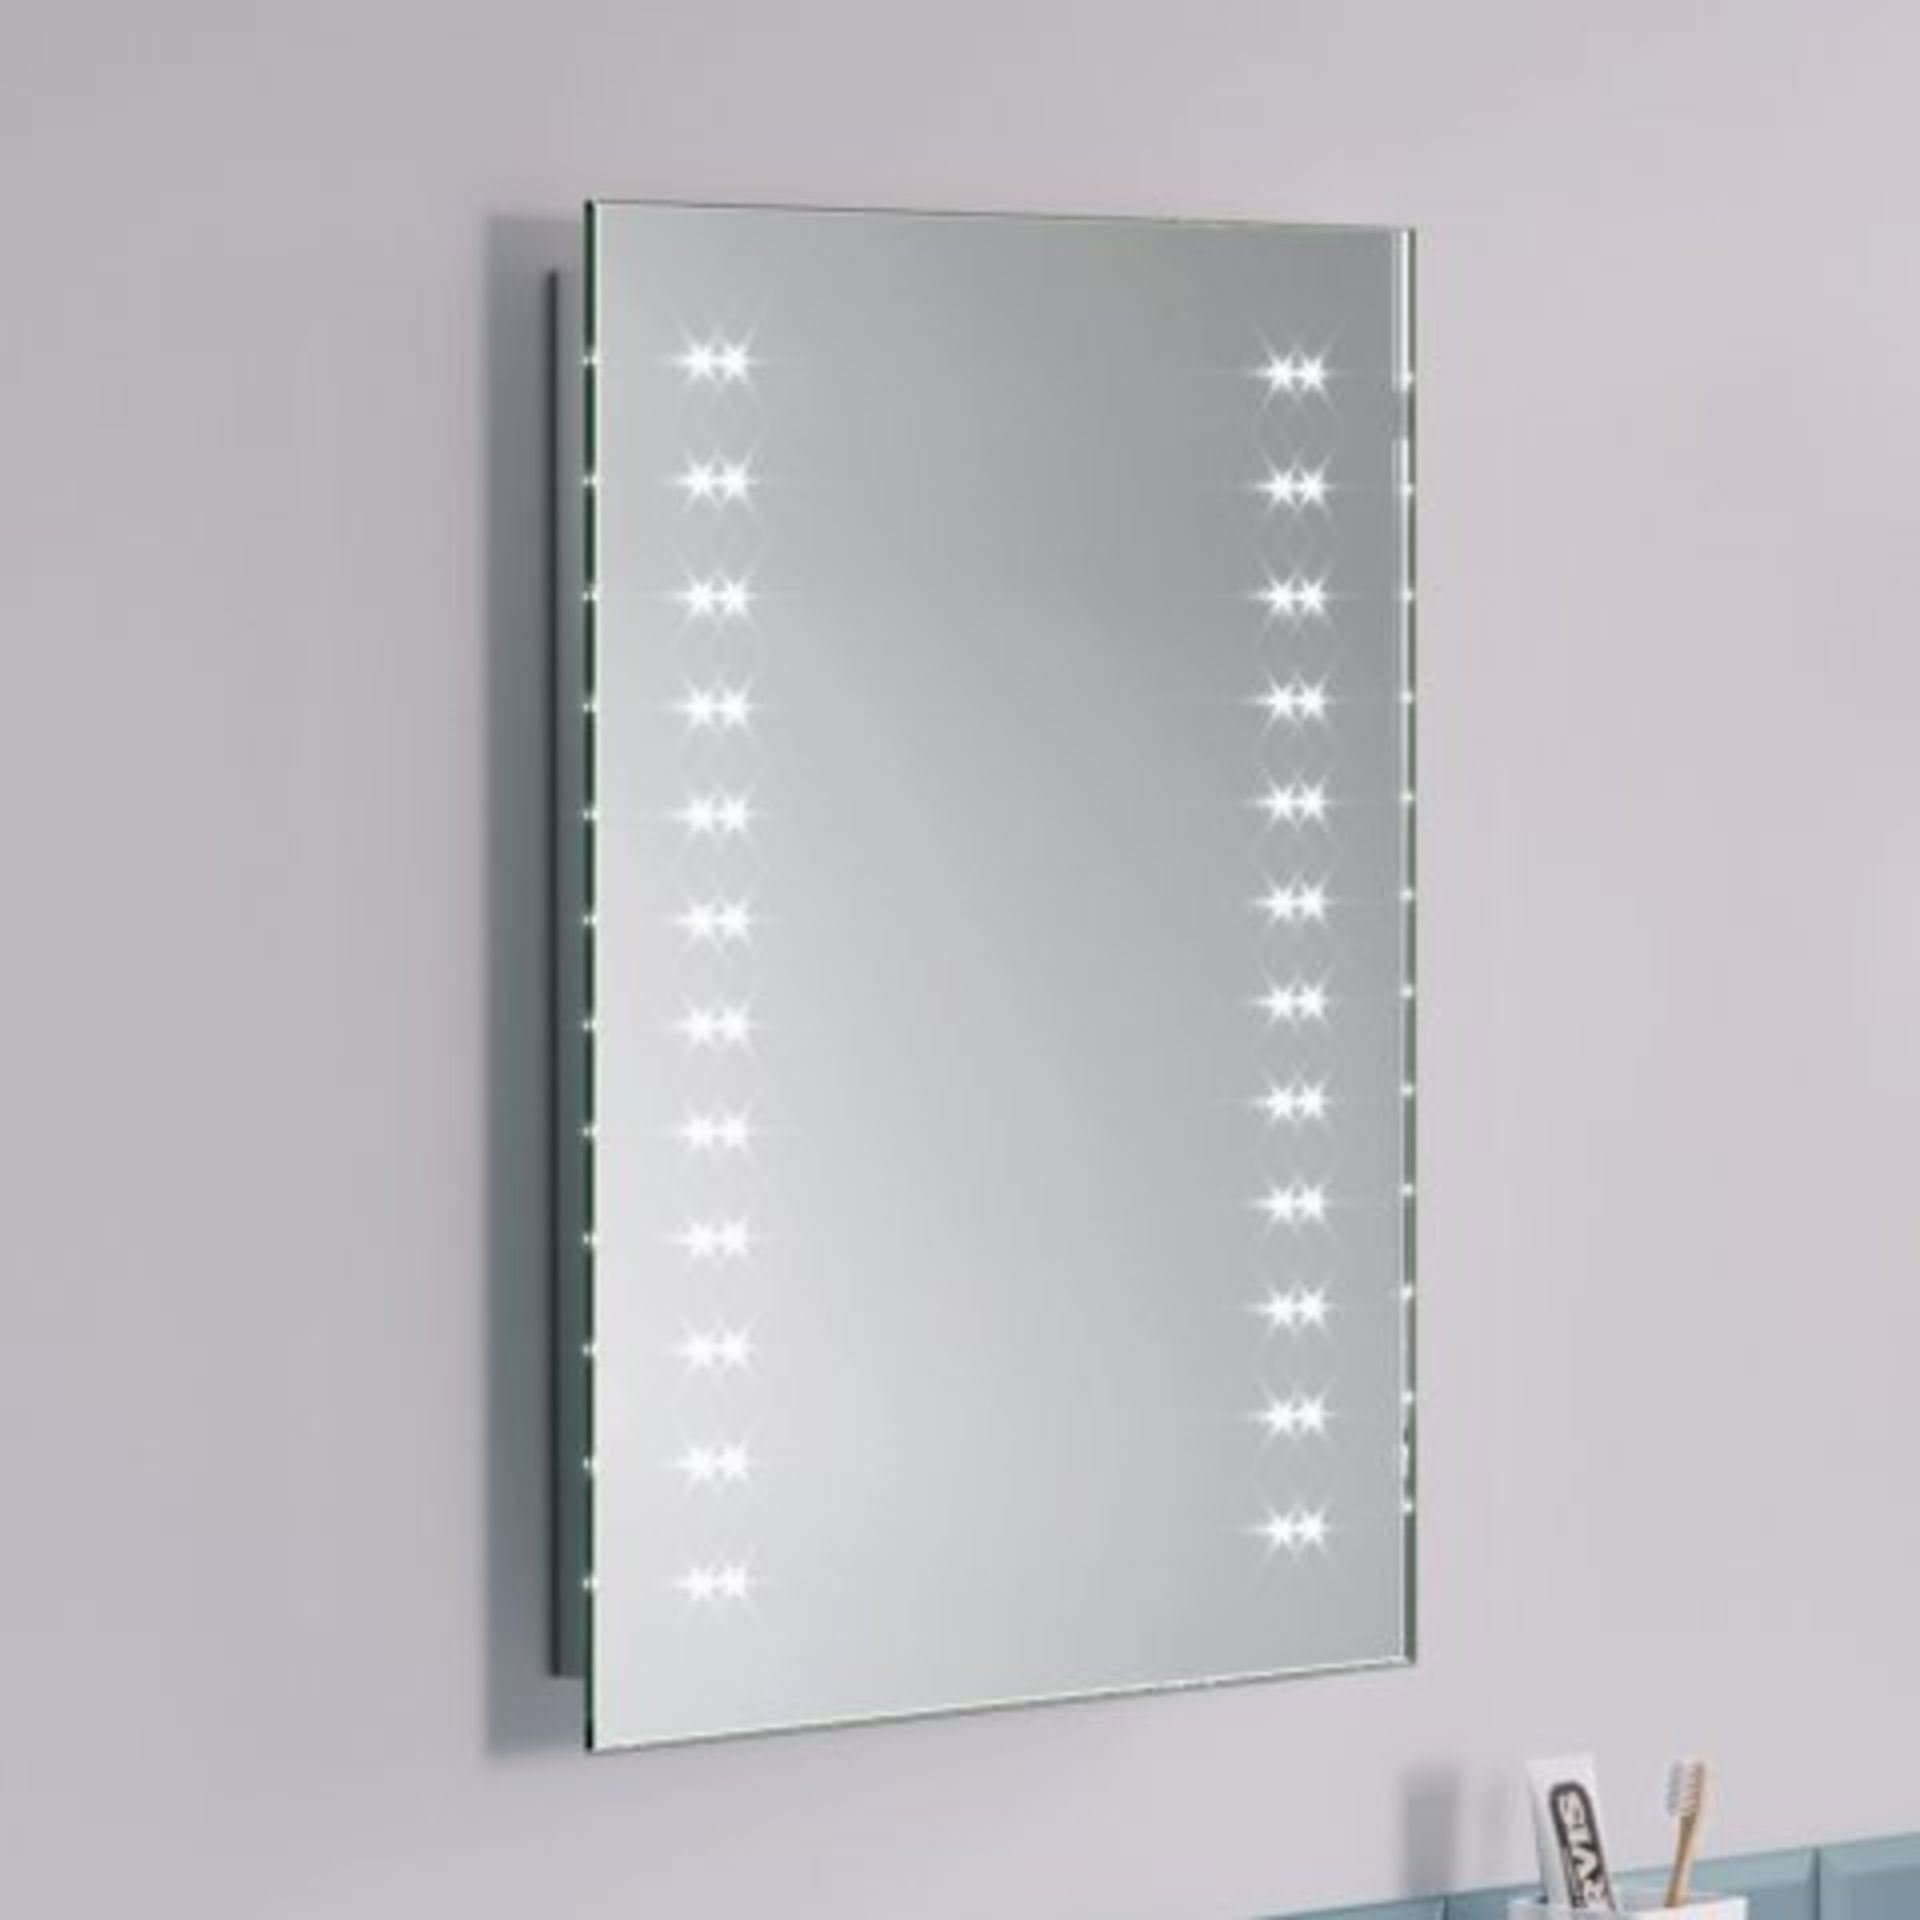 (H210) 390x500mm Galactic LED Mirror - Battery Operated. RRP £249.99. Reflection Perfection The - Image 3 of 3